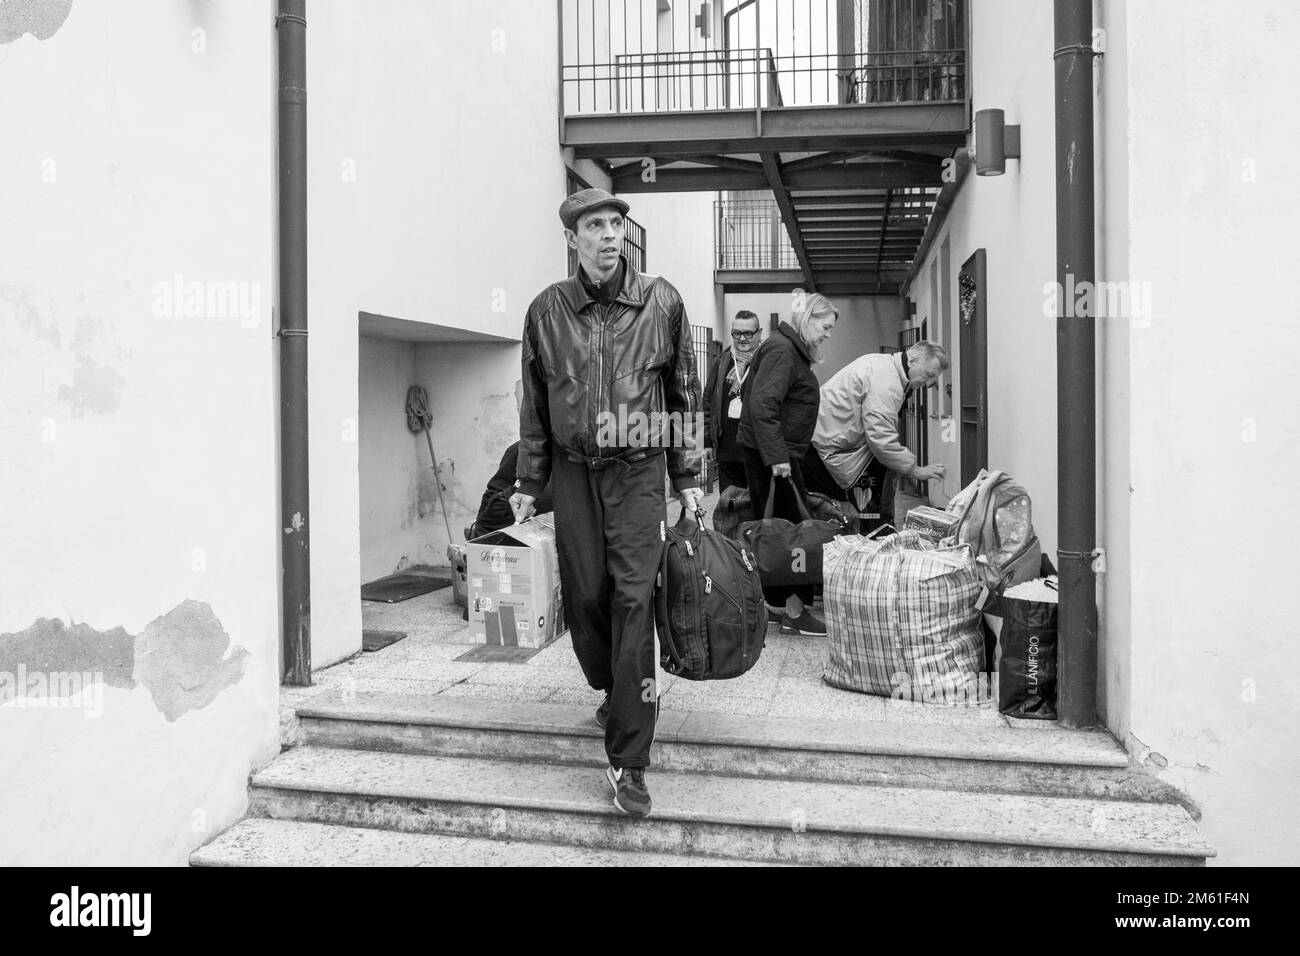 Italy, Abbiategrasso, Ukrainian refugees in the reception center of the former convent of the Annunciata Stock Photo